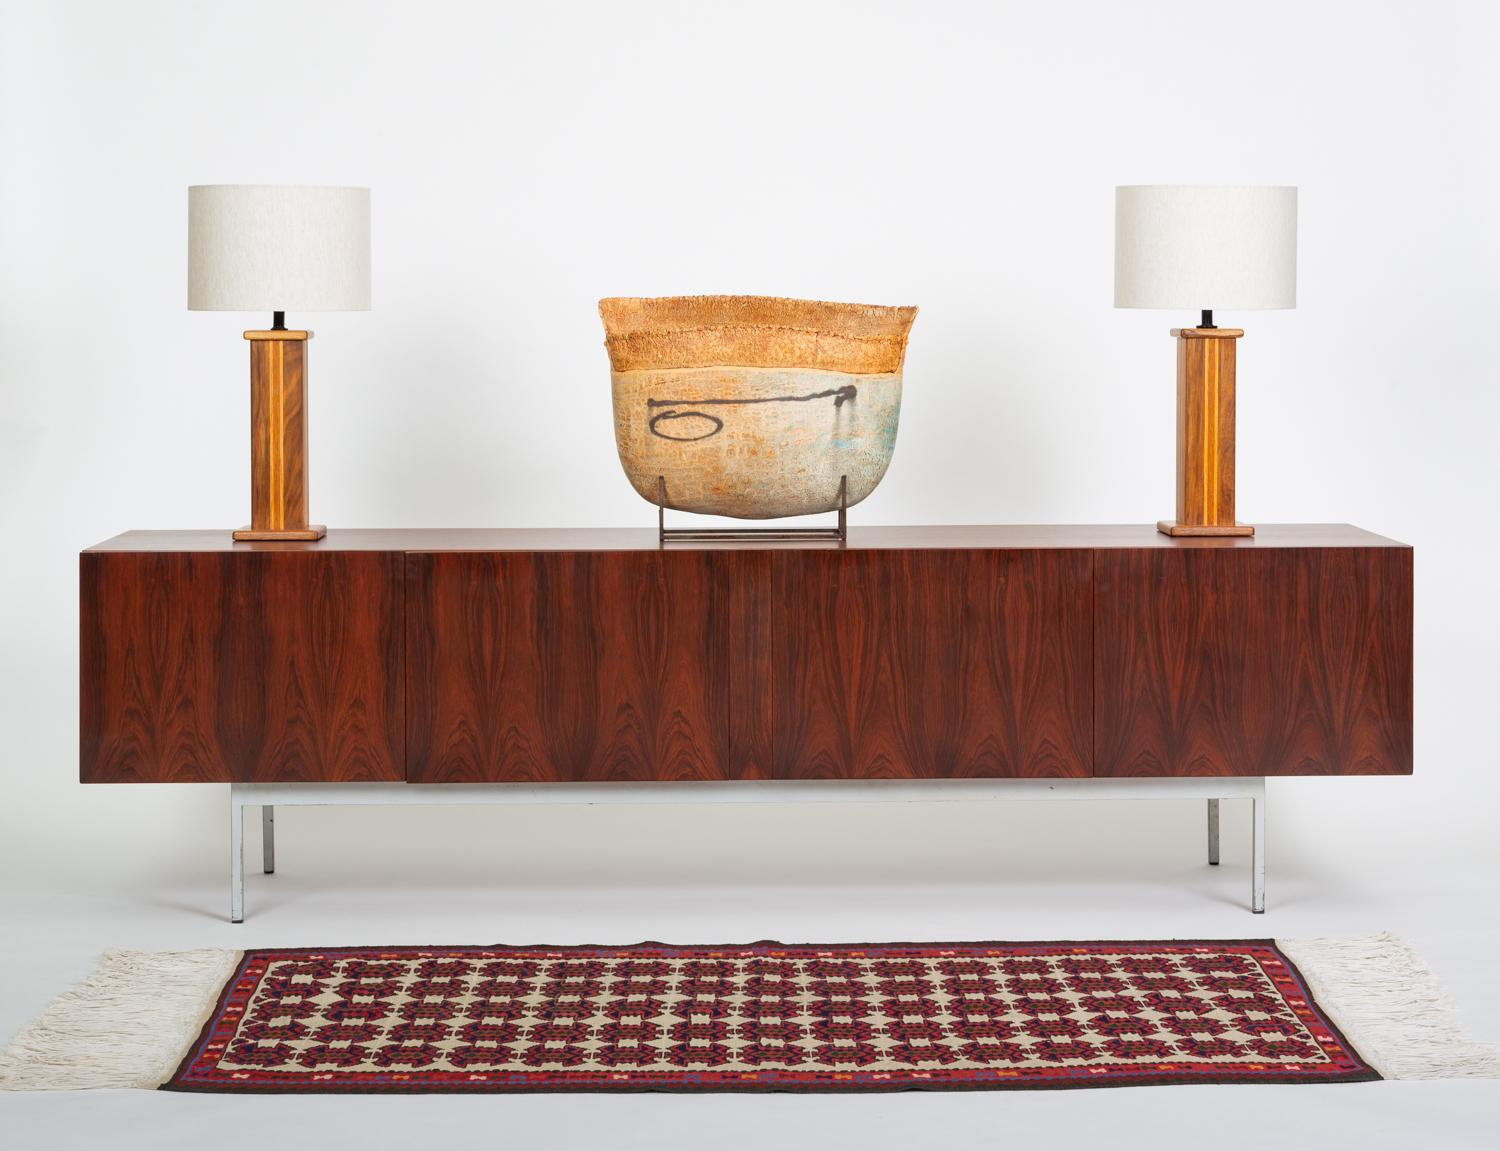 A superlative work of minimalist modern design by the Swiss-born designer Dieter Waeckerlin for his company Idealheim. This credenza was also licensed for production in Germany by Behr Möbel, which commanded a larger market share; Idealheim